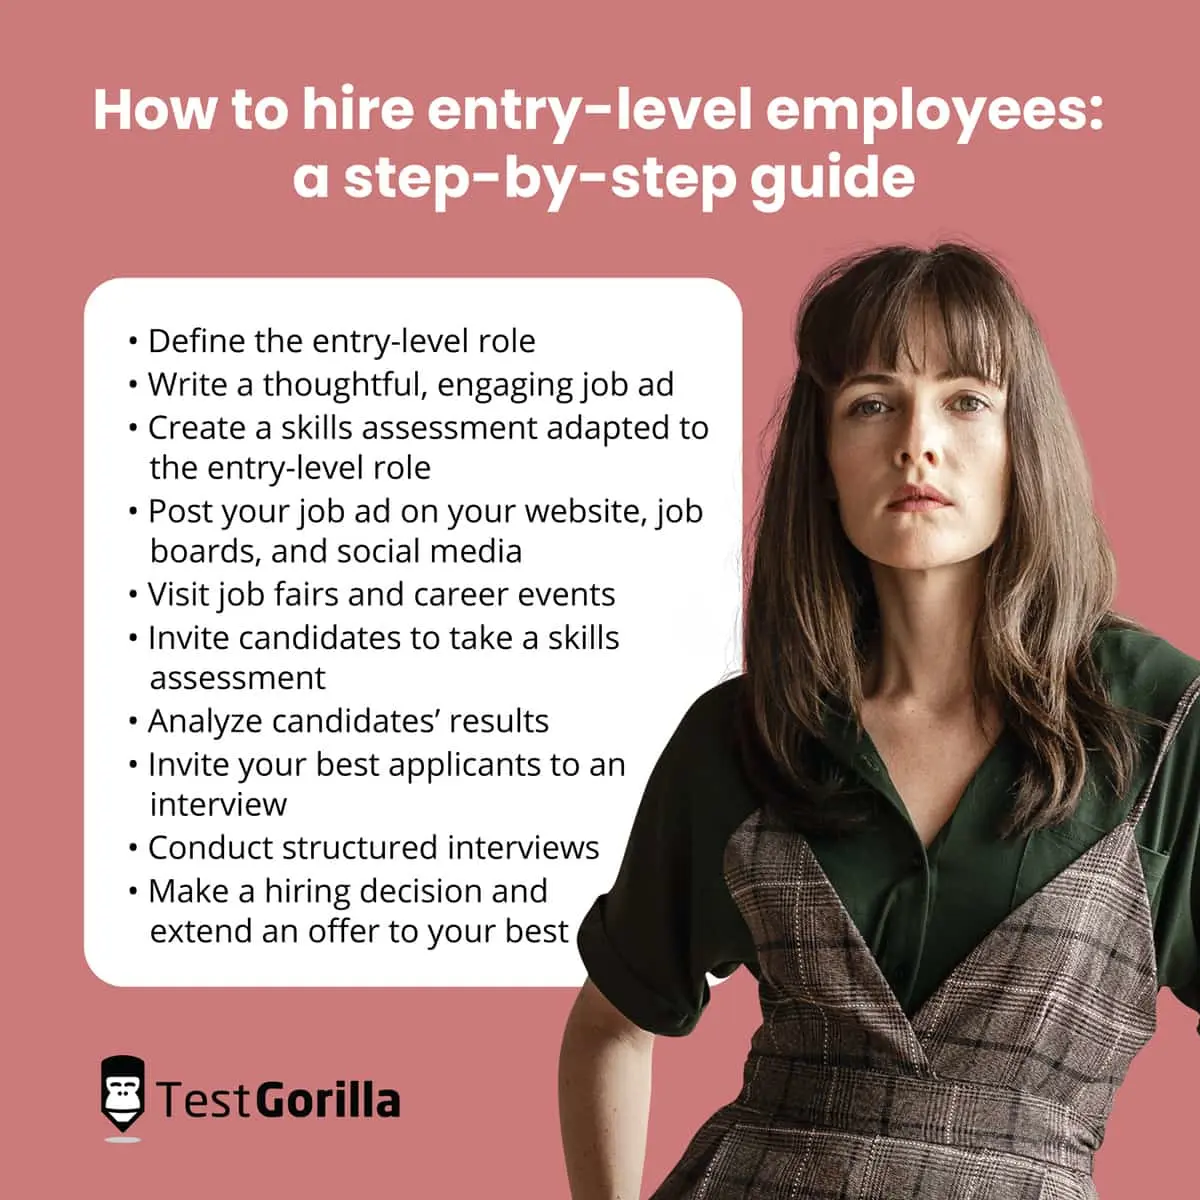 How to hire entry-level employees the right way - TestGorilla